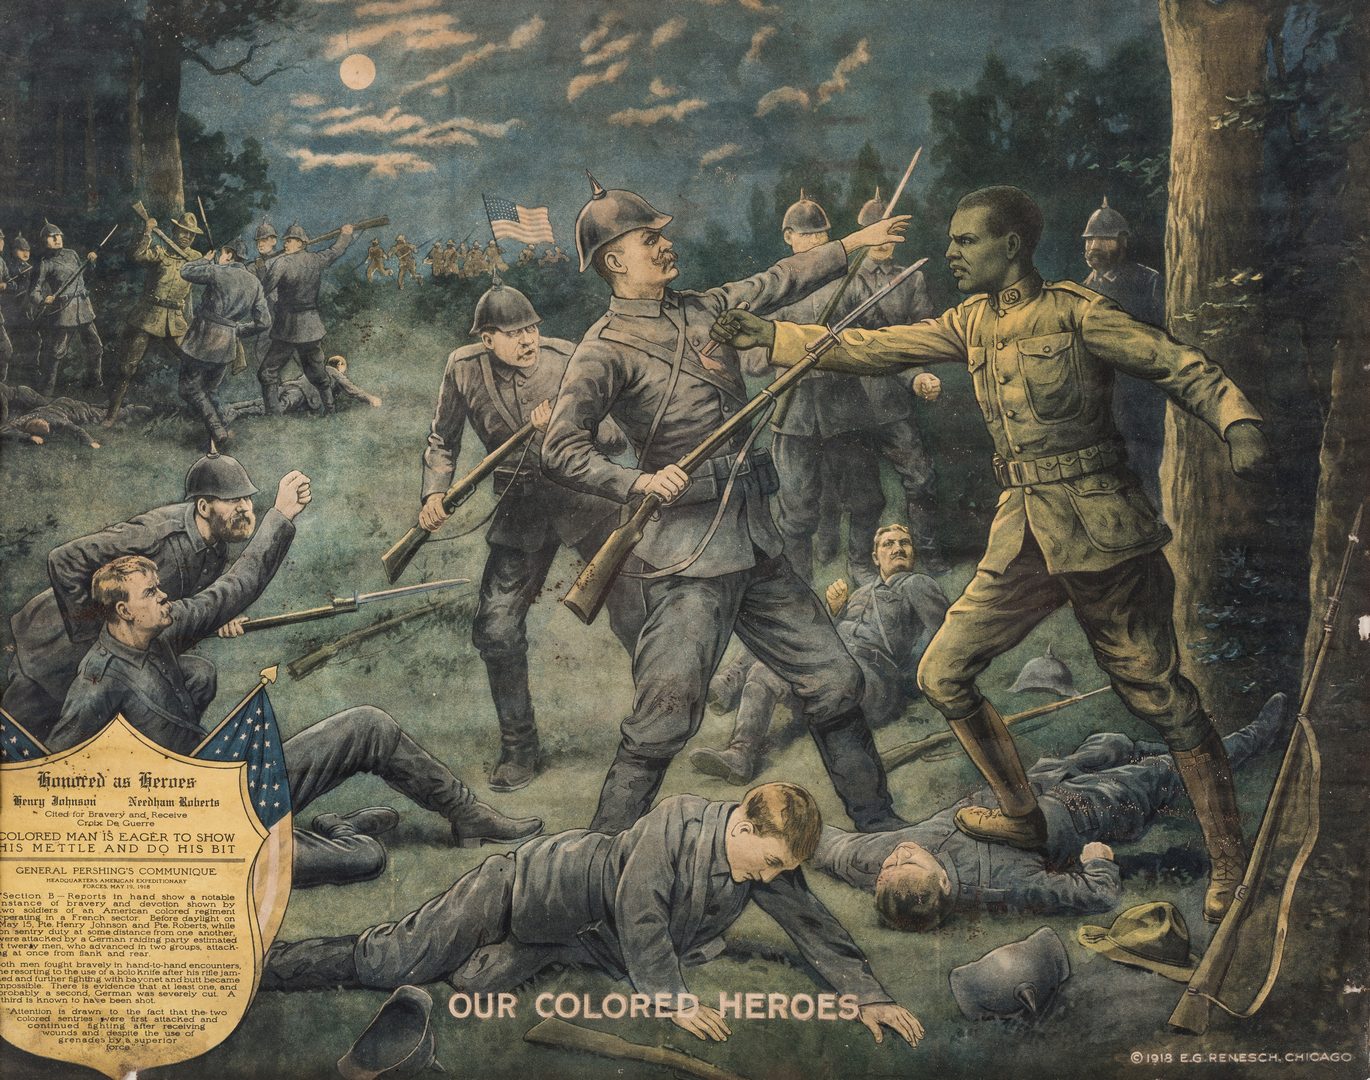 Lot 531: Company C Photo and WWI Poster, 2 items